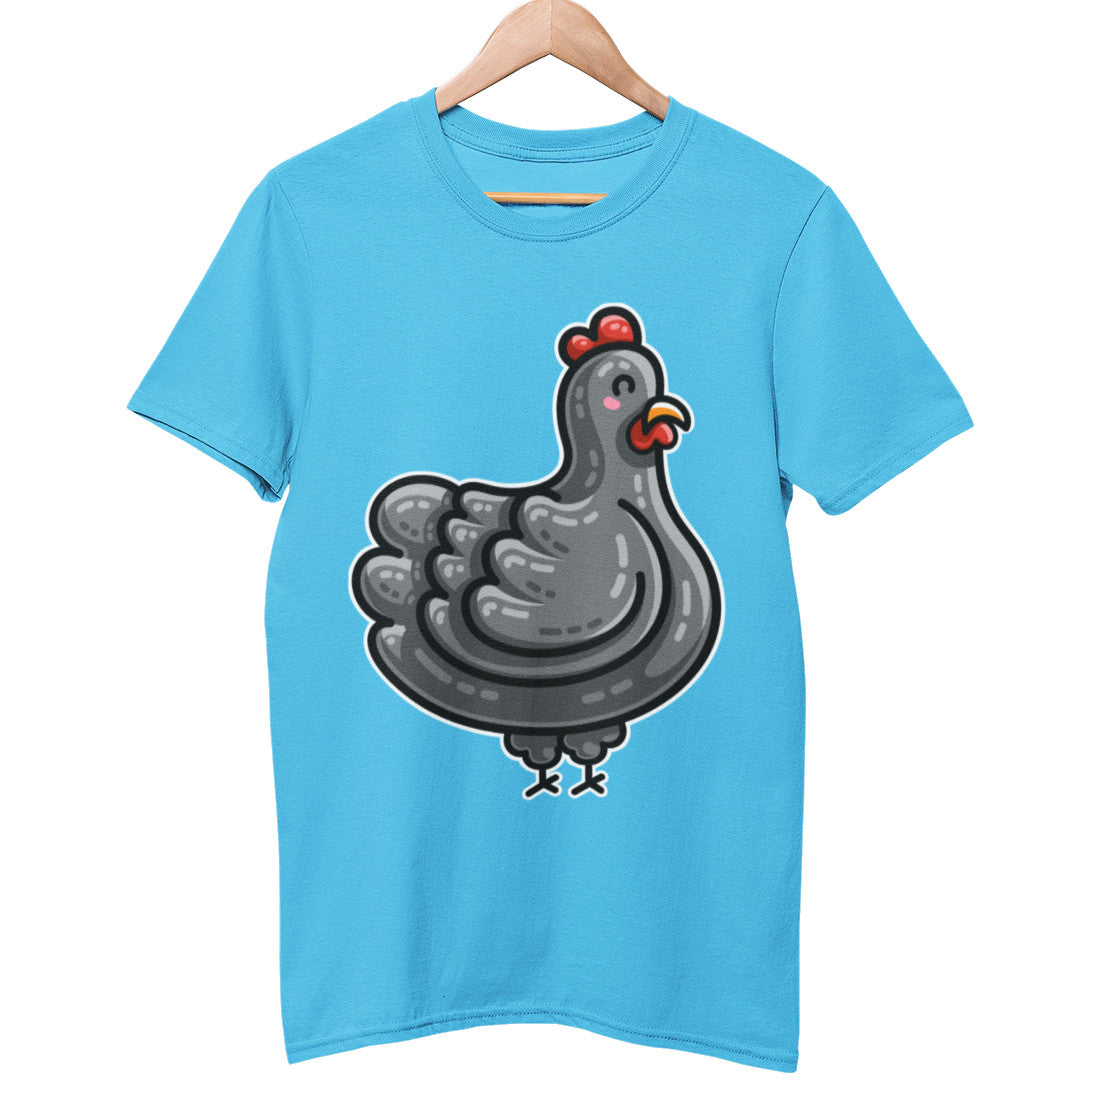 An aqua blue coloured unisex crewneck t-shirt on a hanger with a design of a kawaii cute black chicken facing to the right